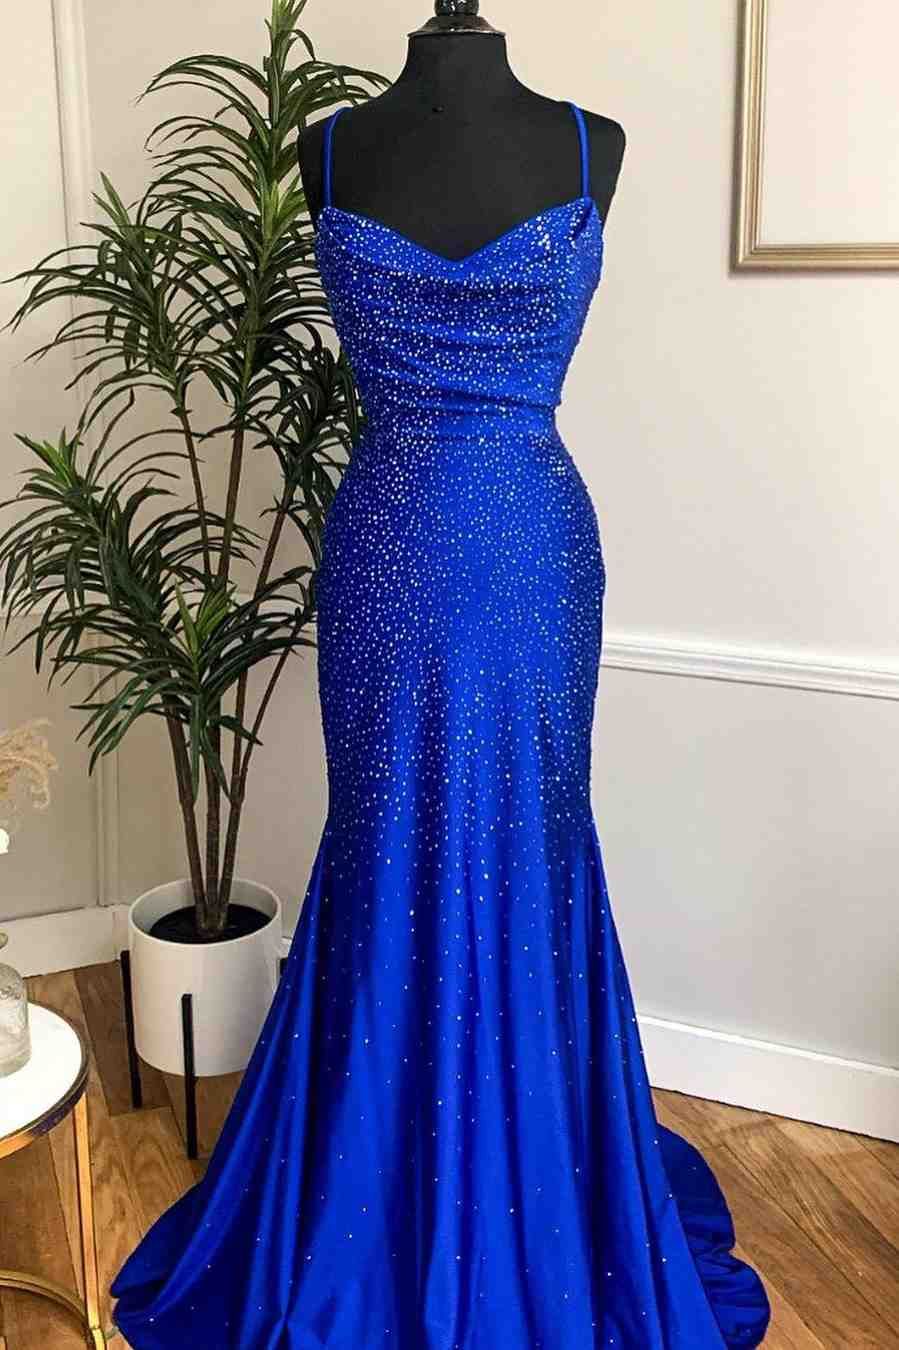 Royal Blue Prom Dresses: Perfect For Prom
Nights